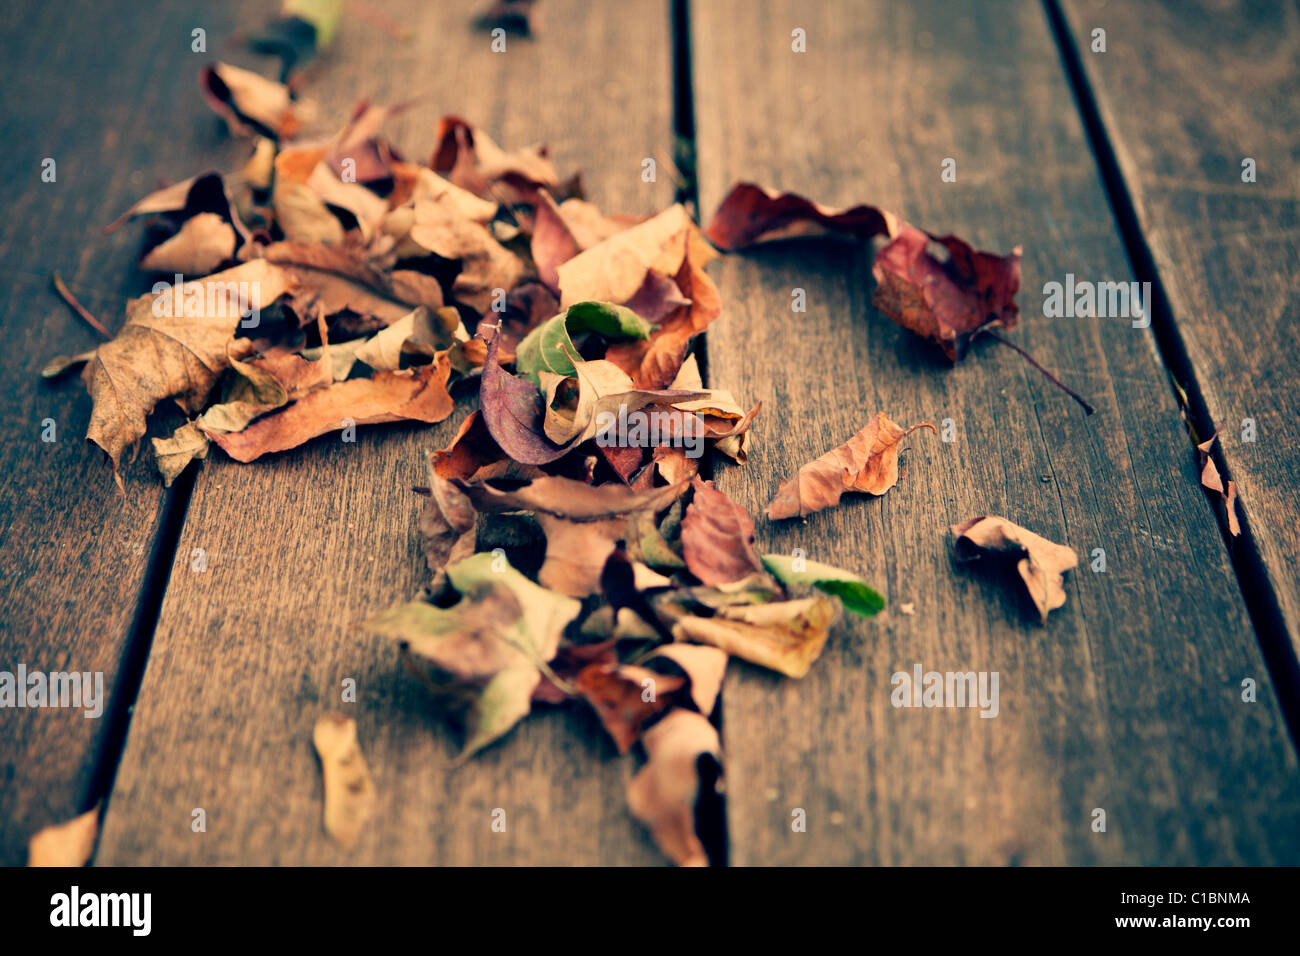 DRY LEAF LEAVES WOODEN FLOOR AUTUMN FALL ESSENCE OUTSIDE Stock Photo